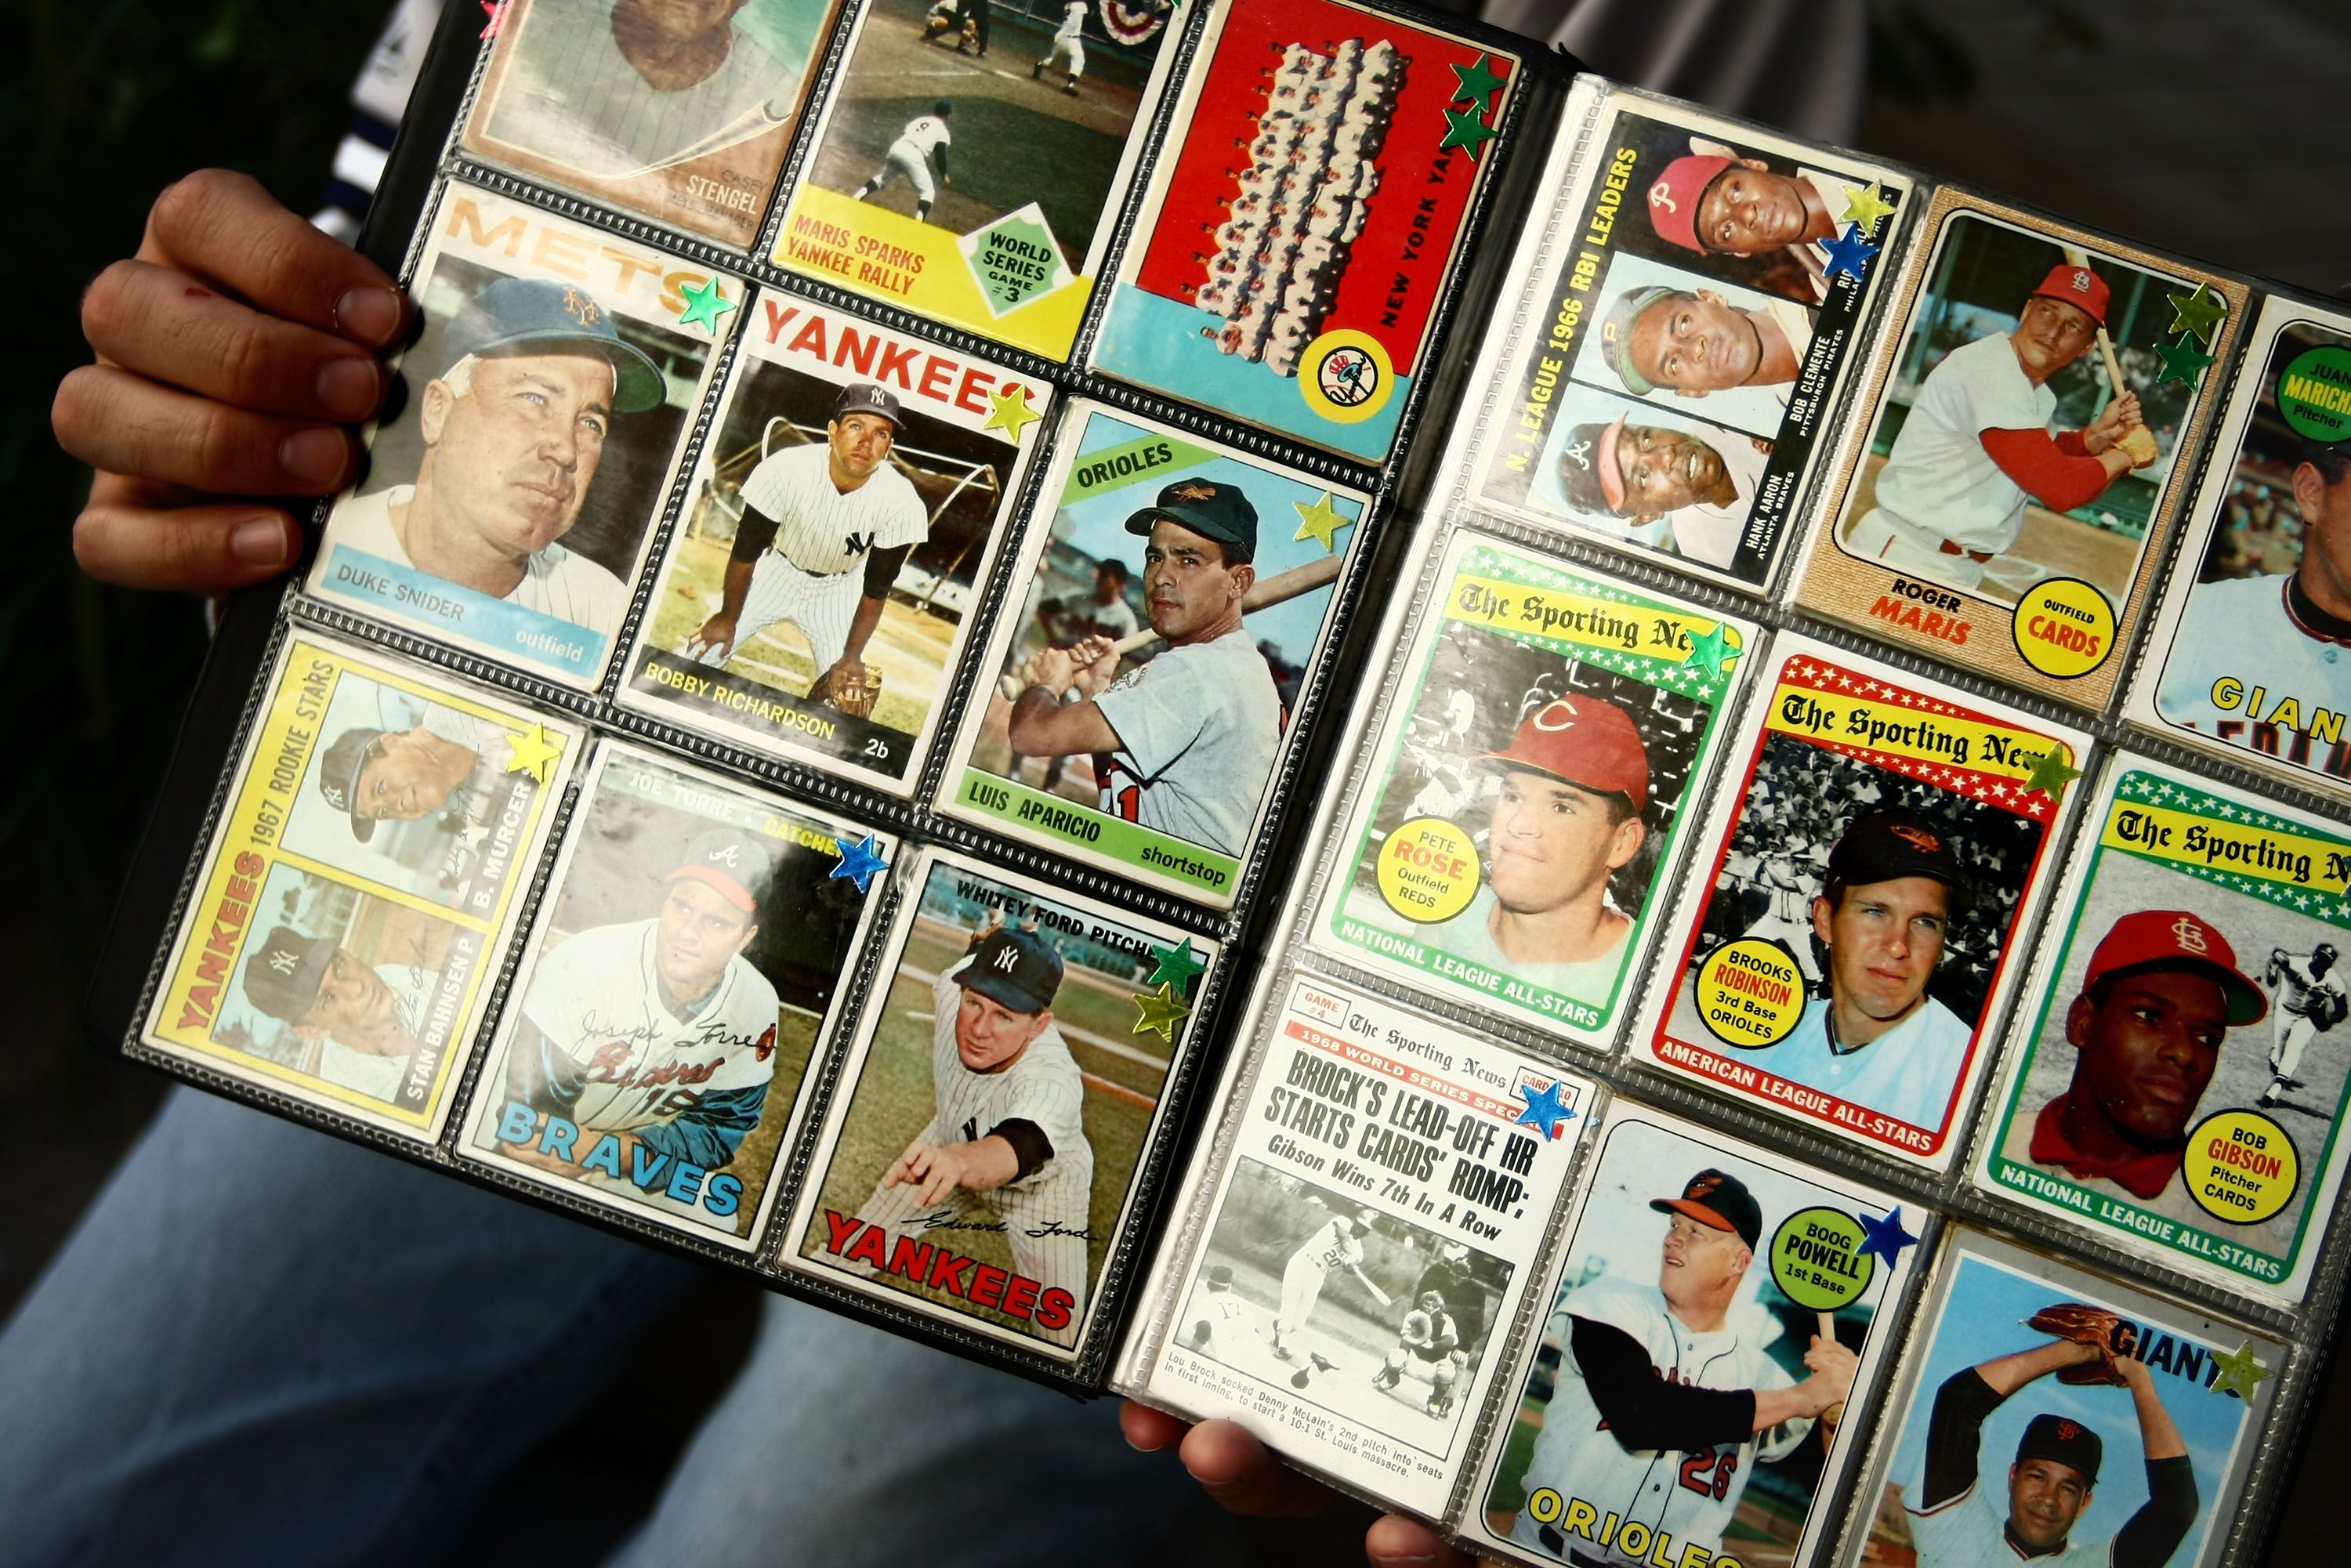 Let's Do Better The Decline of Black Baseball Collection